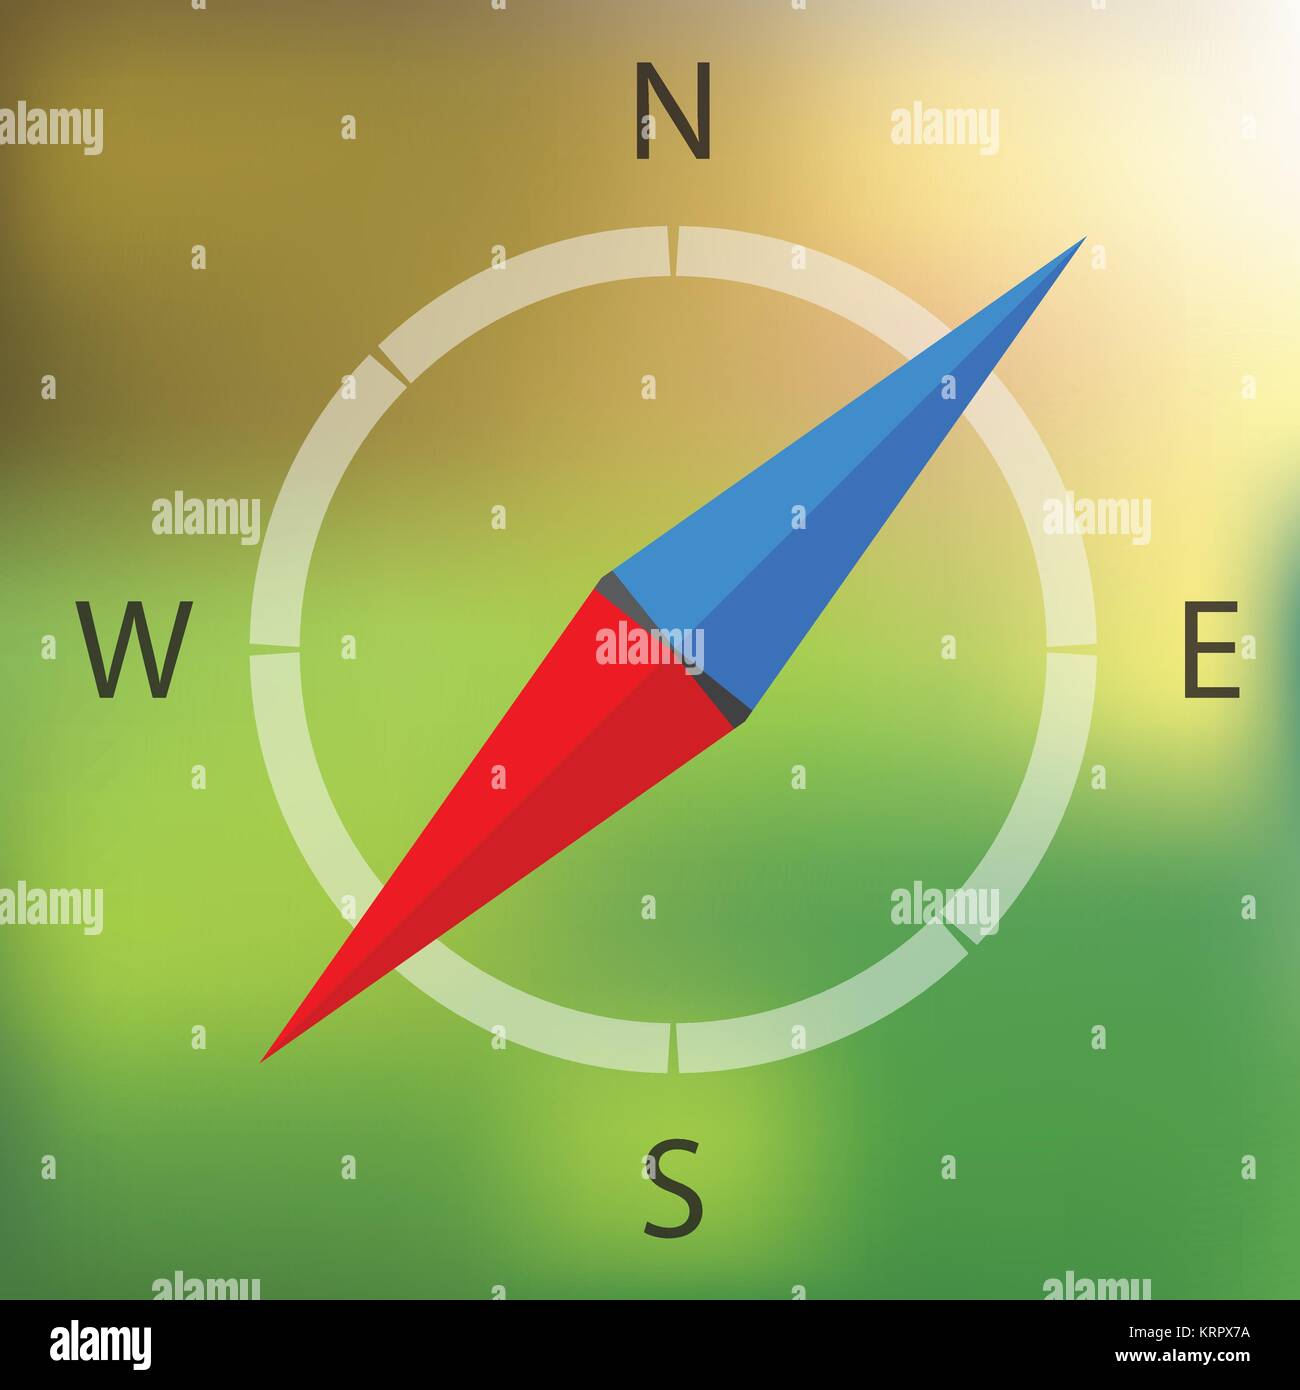 Online Compass - Live and Free Compass to Find North Direction